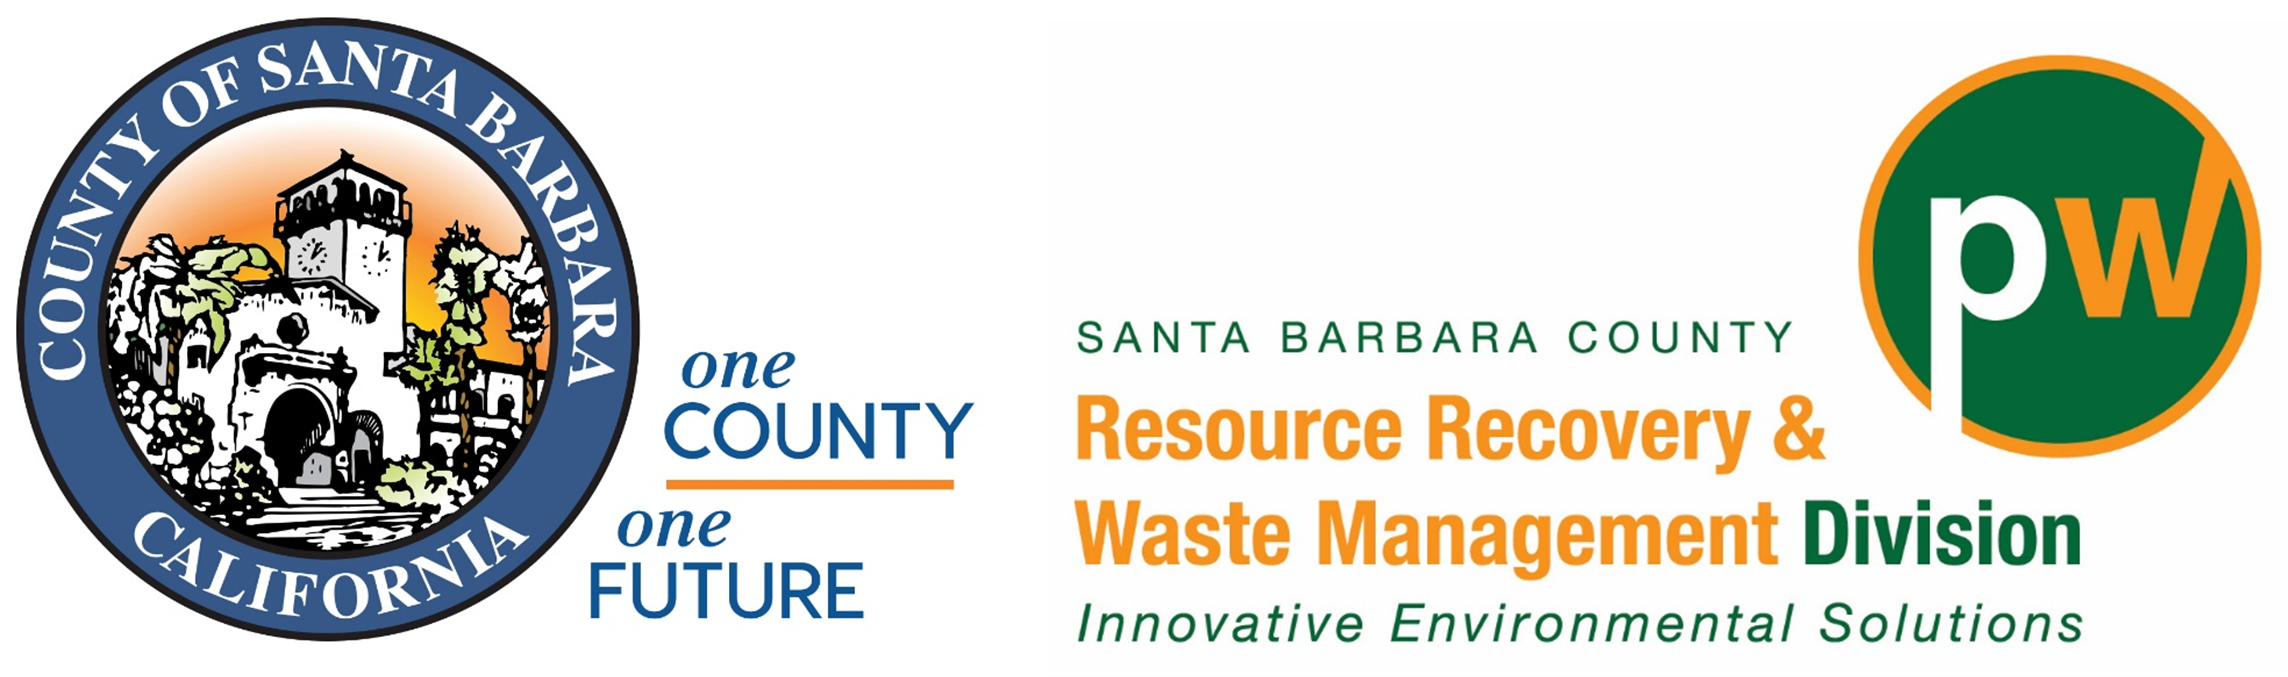 City of Santa Barbara Sustainability and Resilience Department